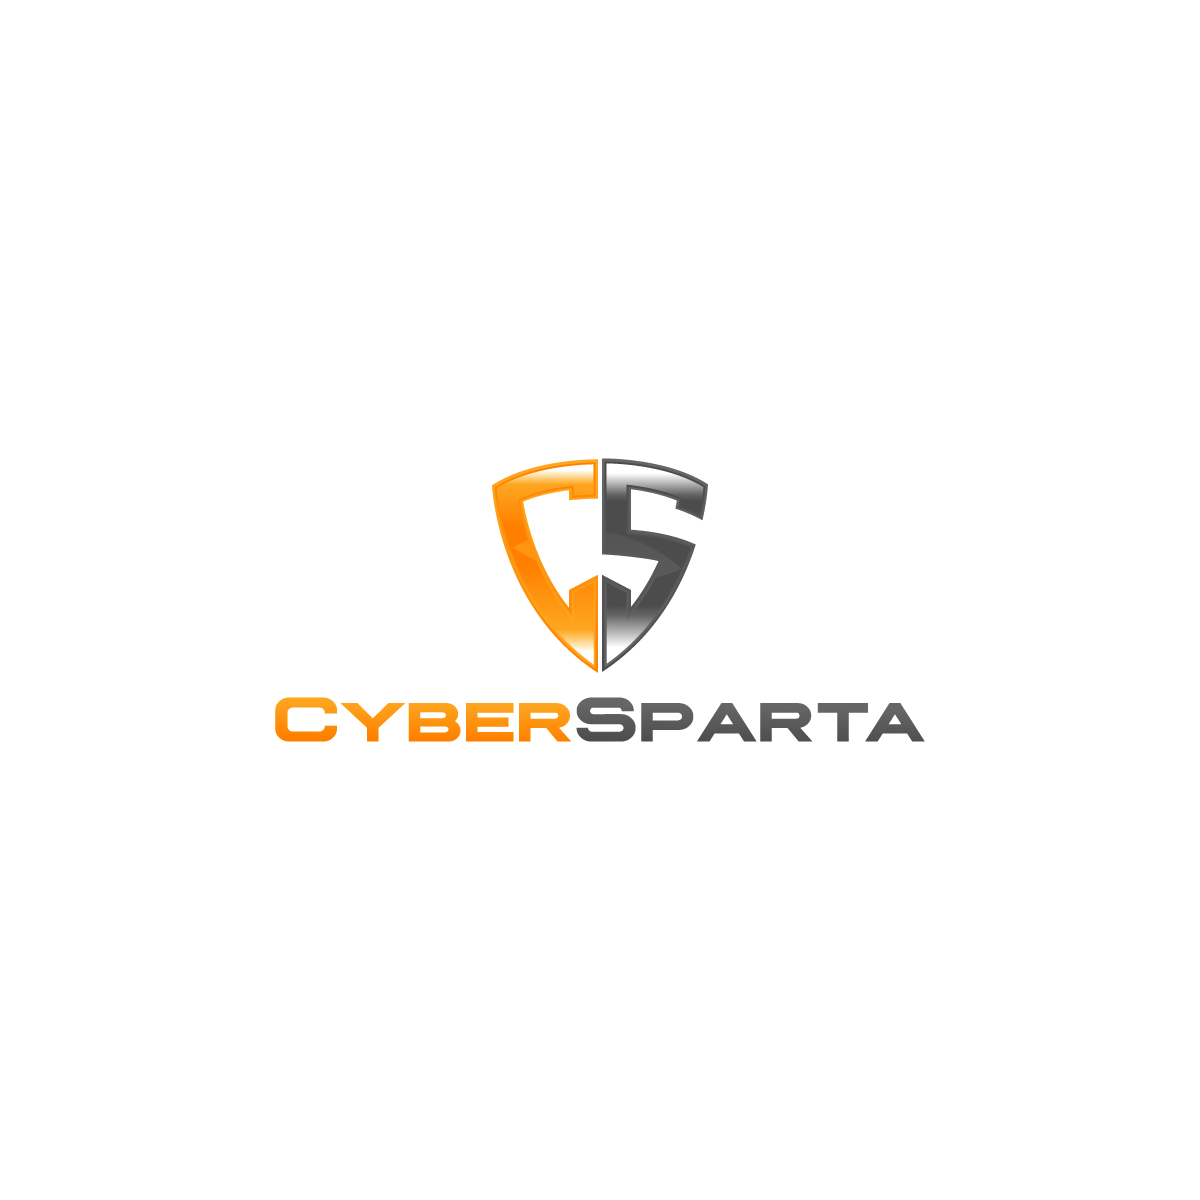 Computer Security Logo - Modern, Playful, Computer Security Logo Design for CyberSparta